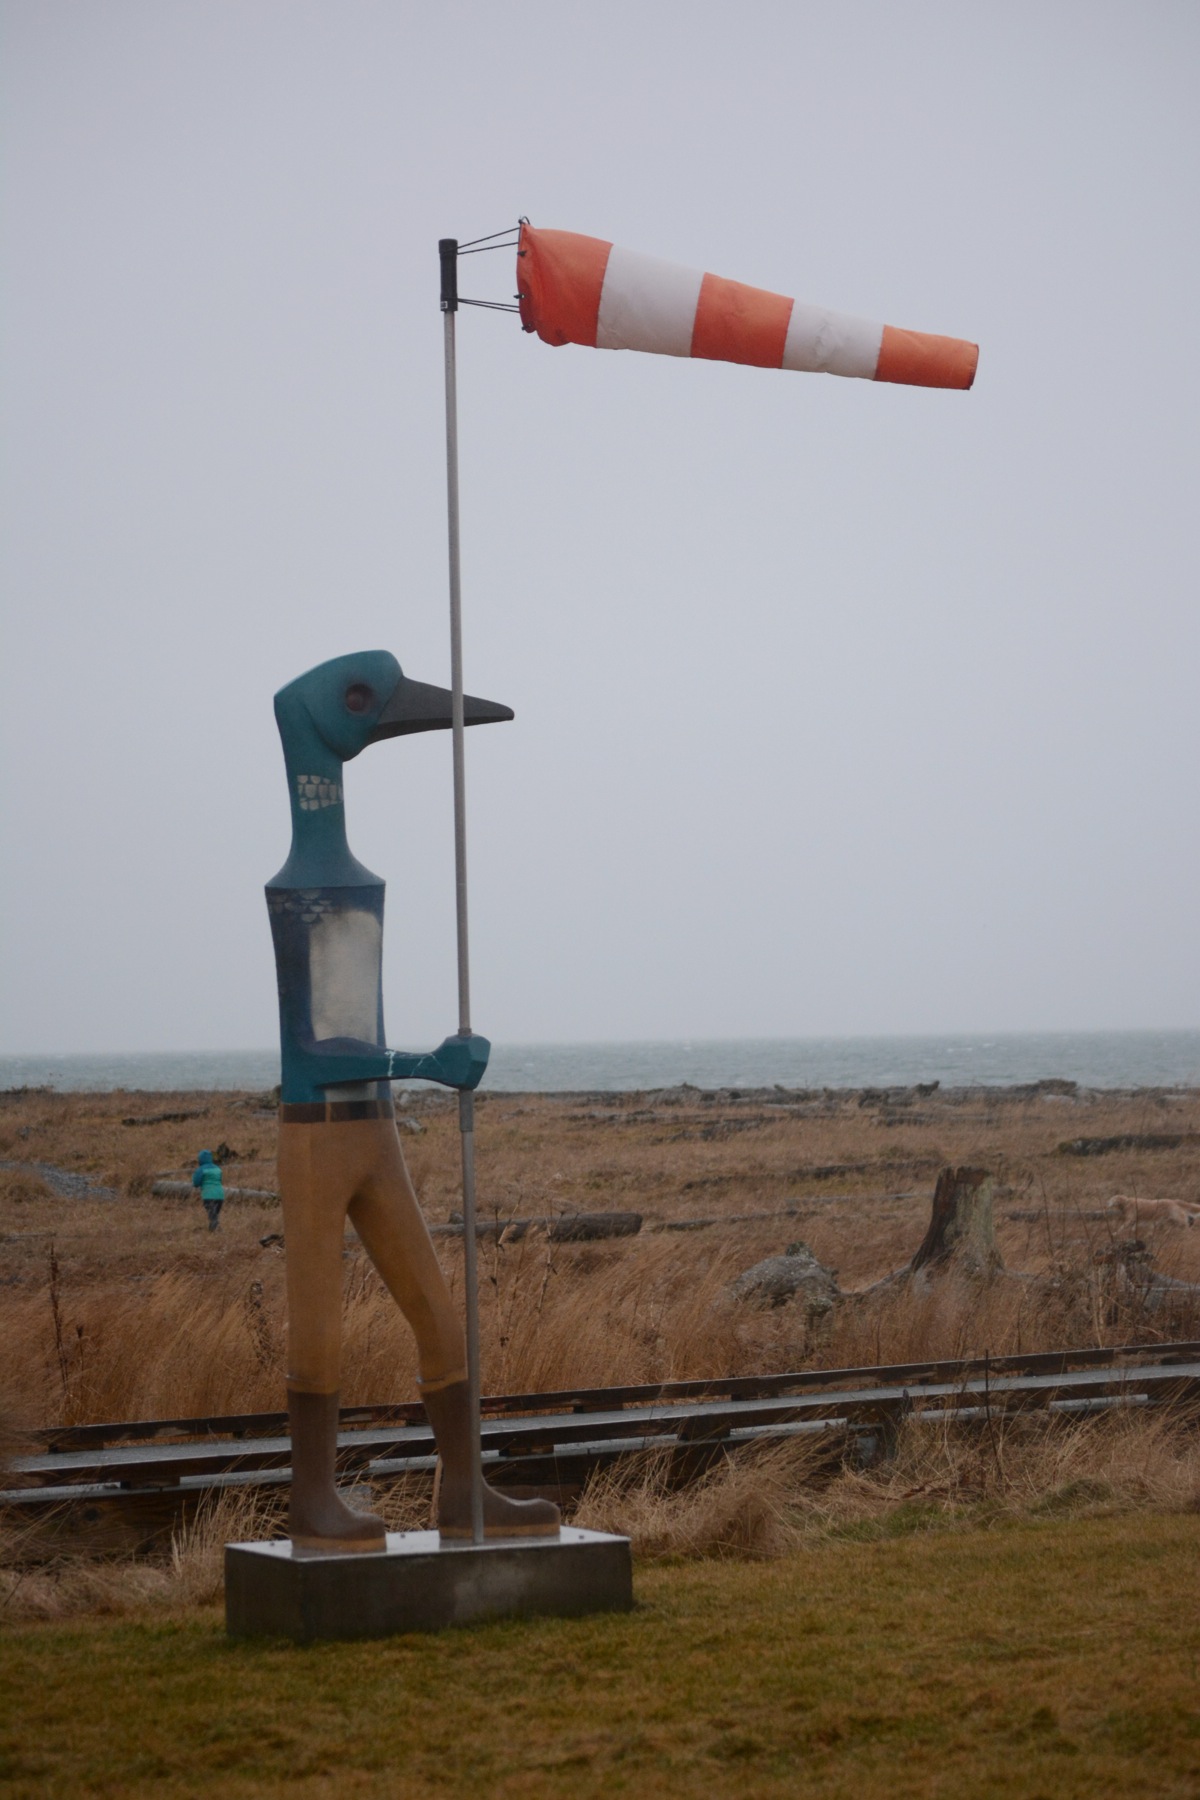 The wind sock flies almost horizontal Monday afternoon on Rachelle Dowdy's loon sculpture at Bishop's Beach.-Photo by Michael Armstrong, Homer News